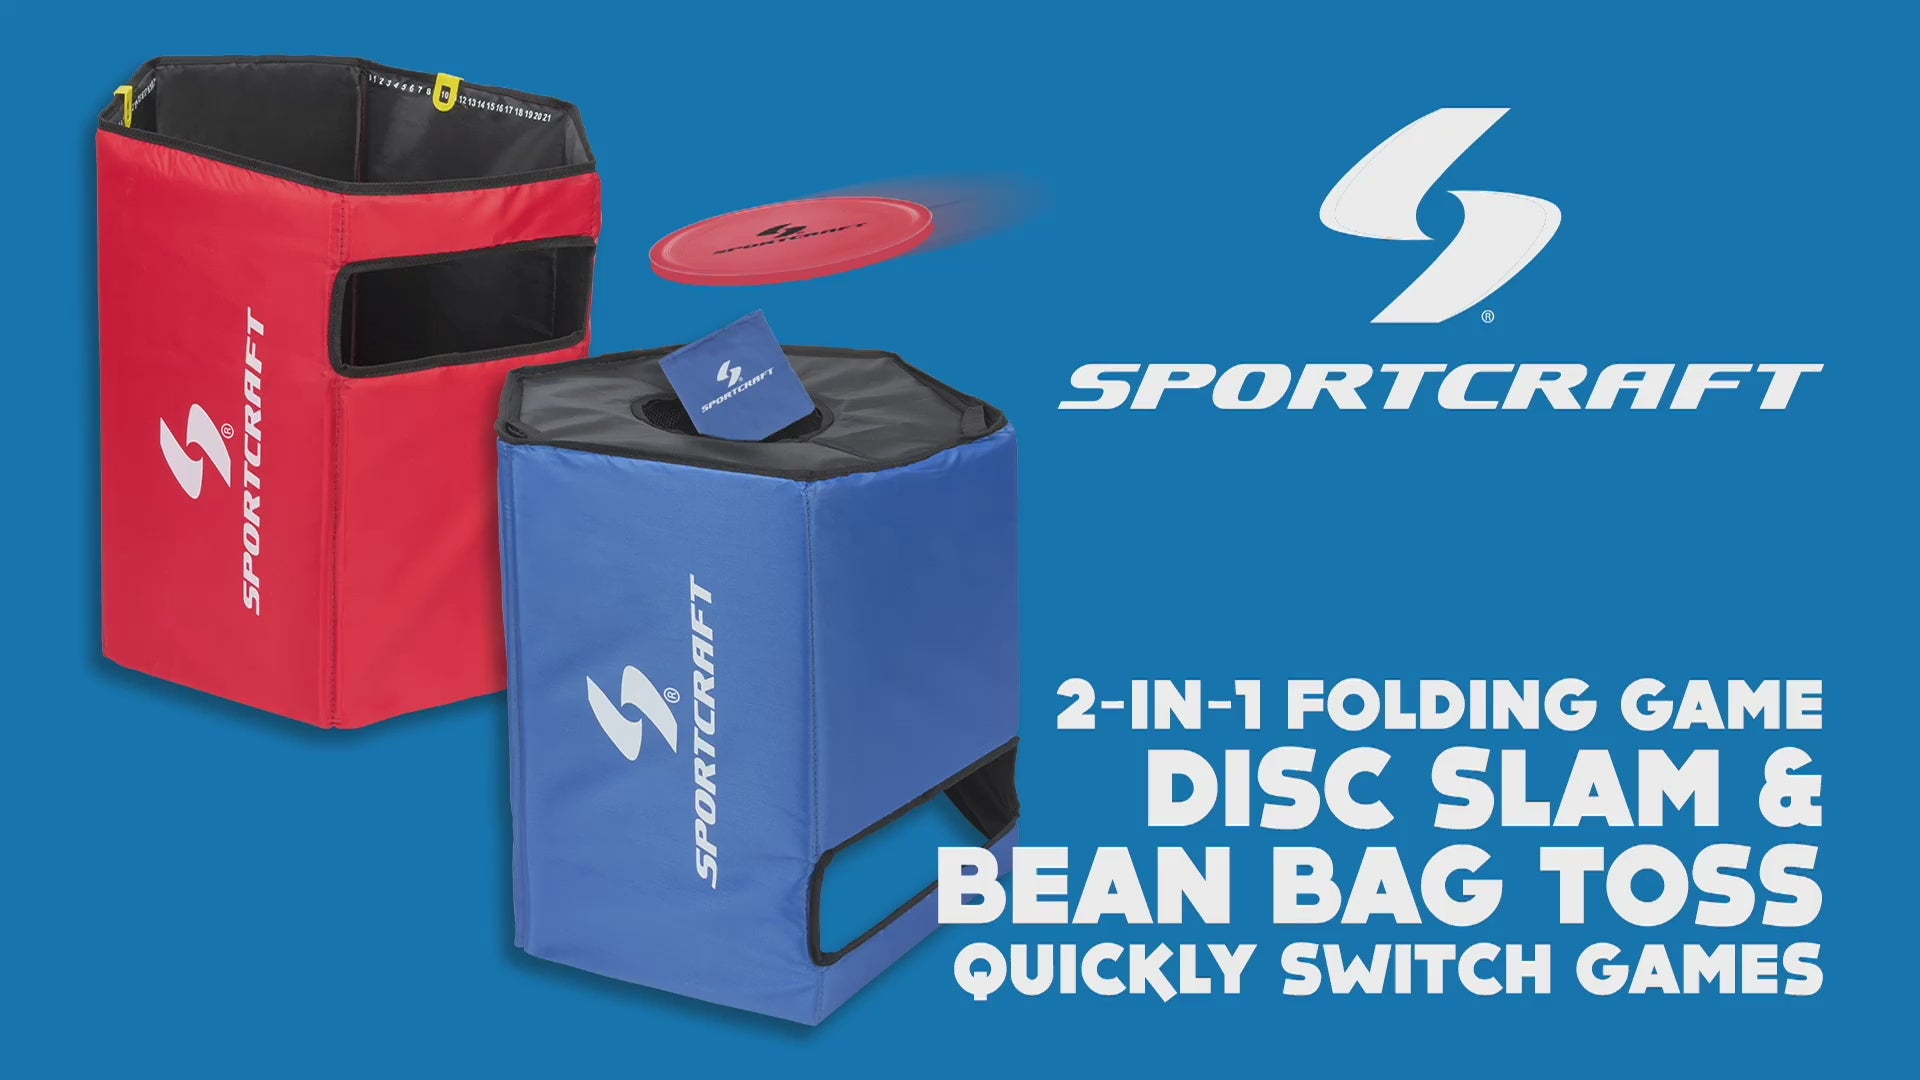 Sportcraft 2-In-1 Folding Disc Slam And Bean Bag Toss Game - Video showing product